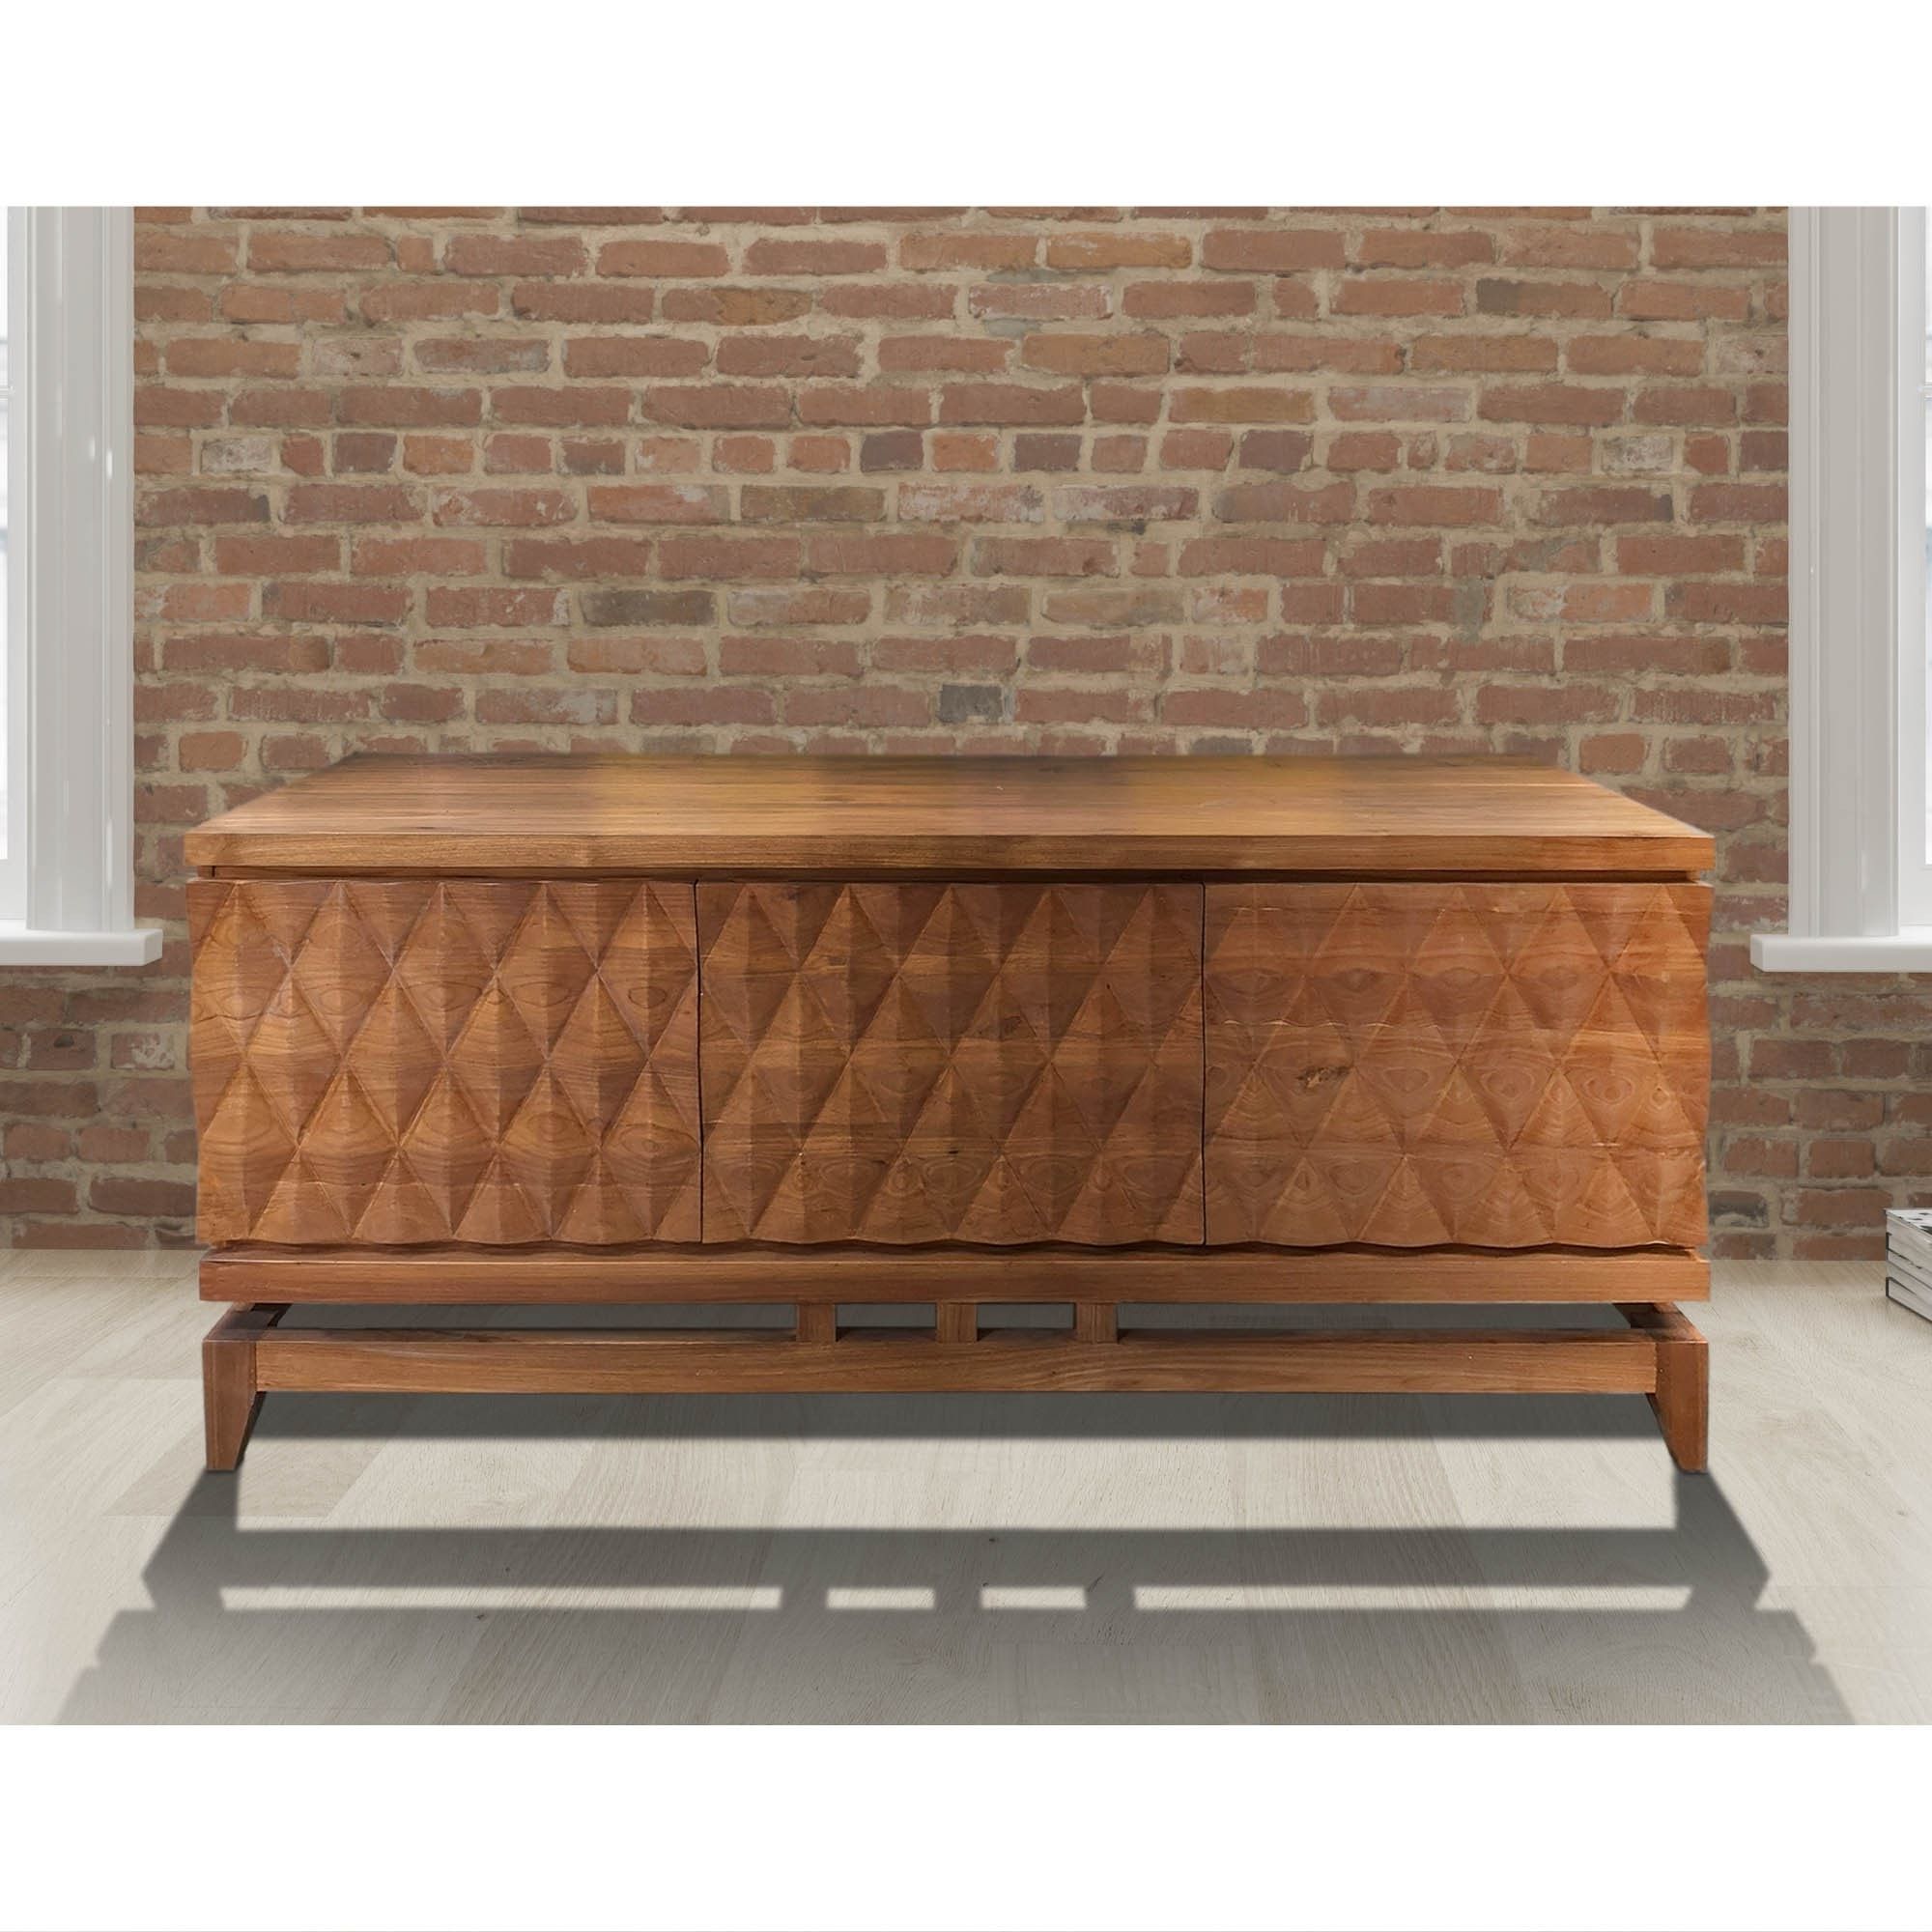 Large Geometric Sideboard | Large Wooden Sideboard | Modern Sideboard Throughout Geometric Sideboards (Gallery 11 of 20)